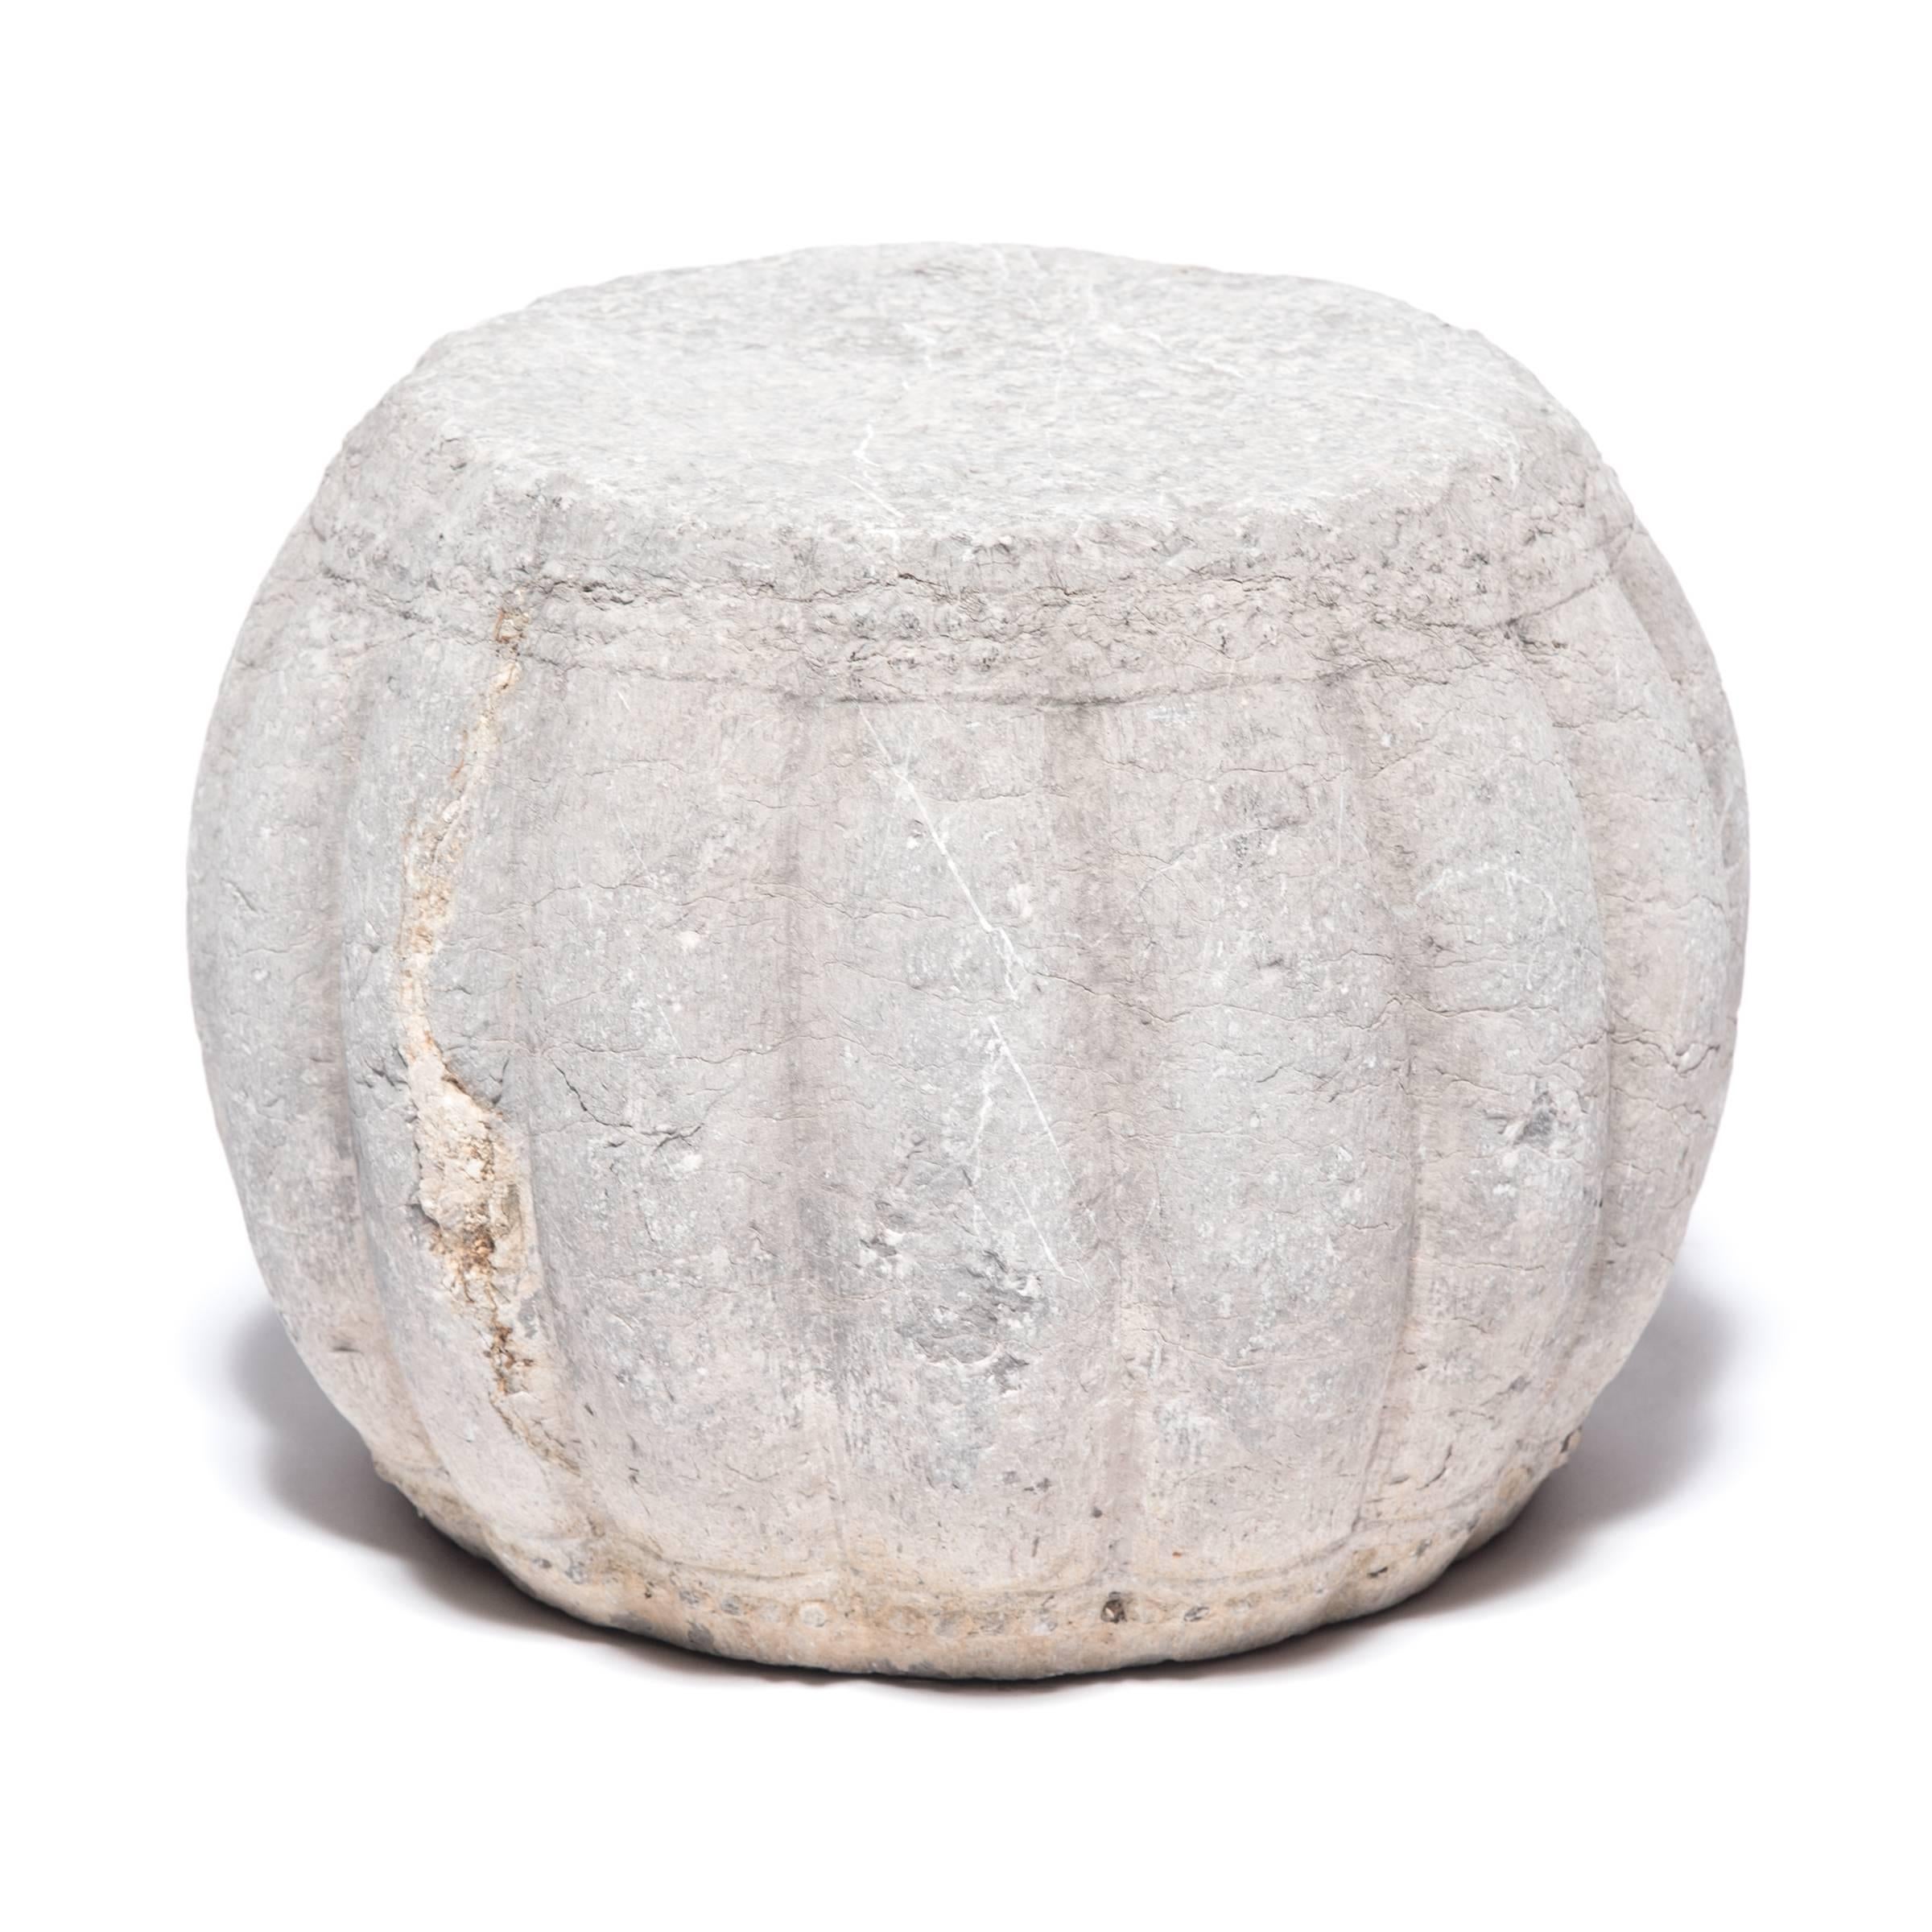 Hand-carved from limestone, these drum-shaped pedestals swell to a ribbed squash shape, an ancient symbol of fertility. The artist used a hobnail-like texture on either end of each pedestal to suggest the rivets that fasten skin stretched over a